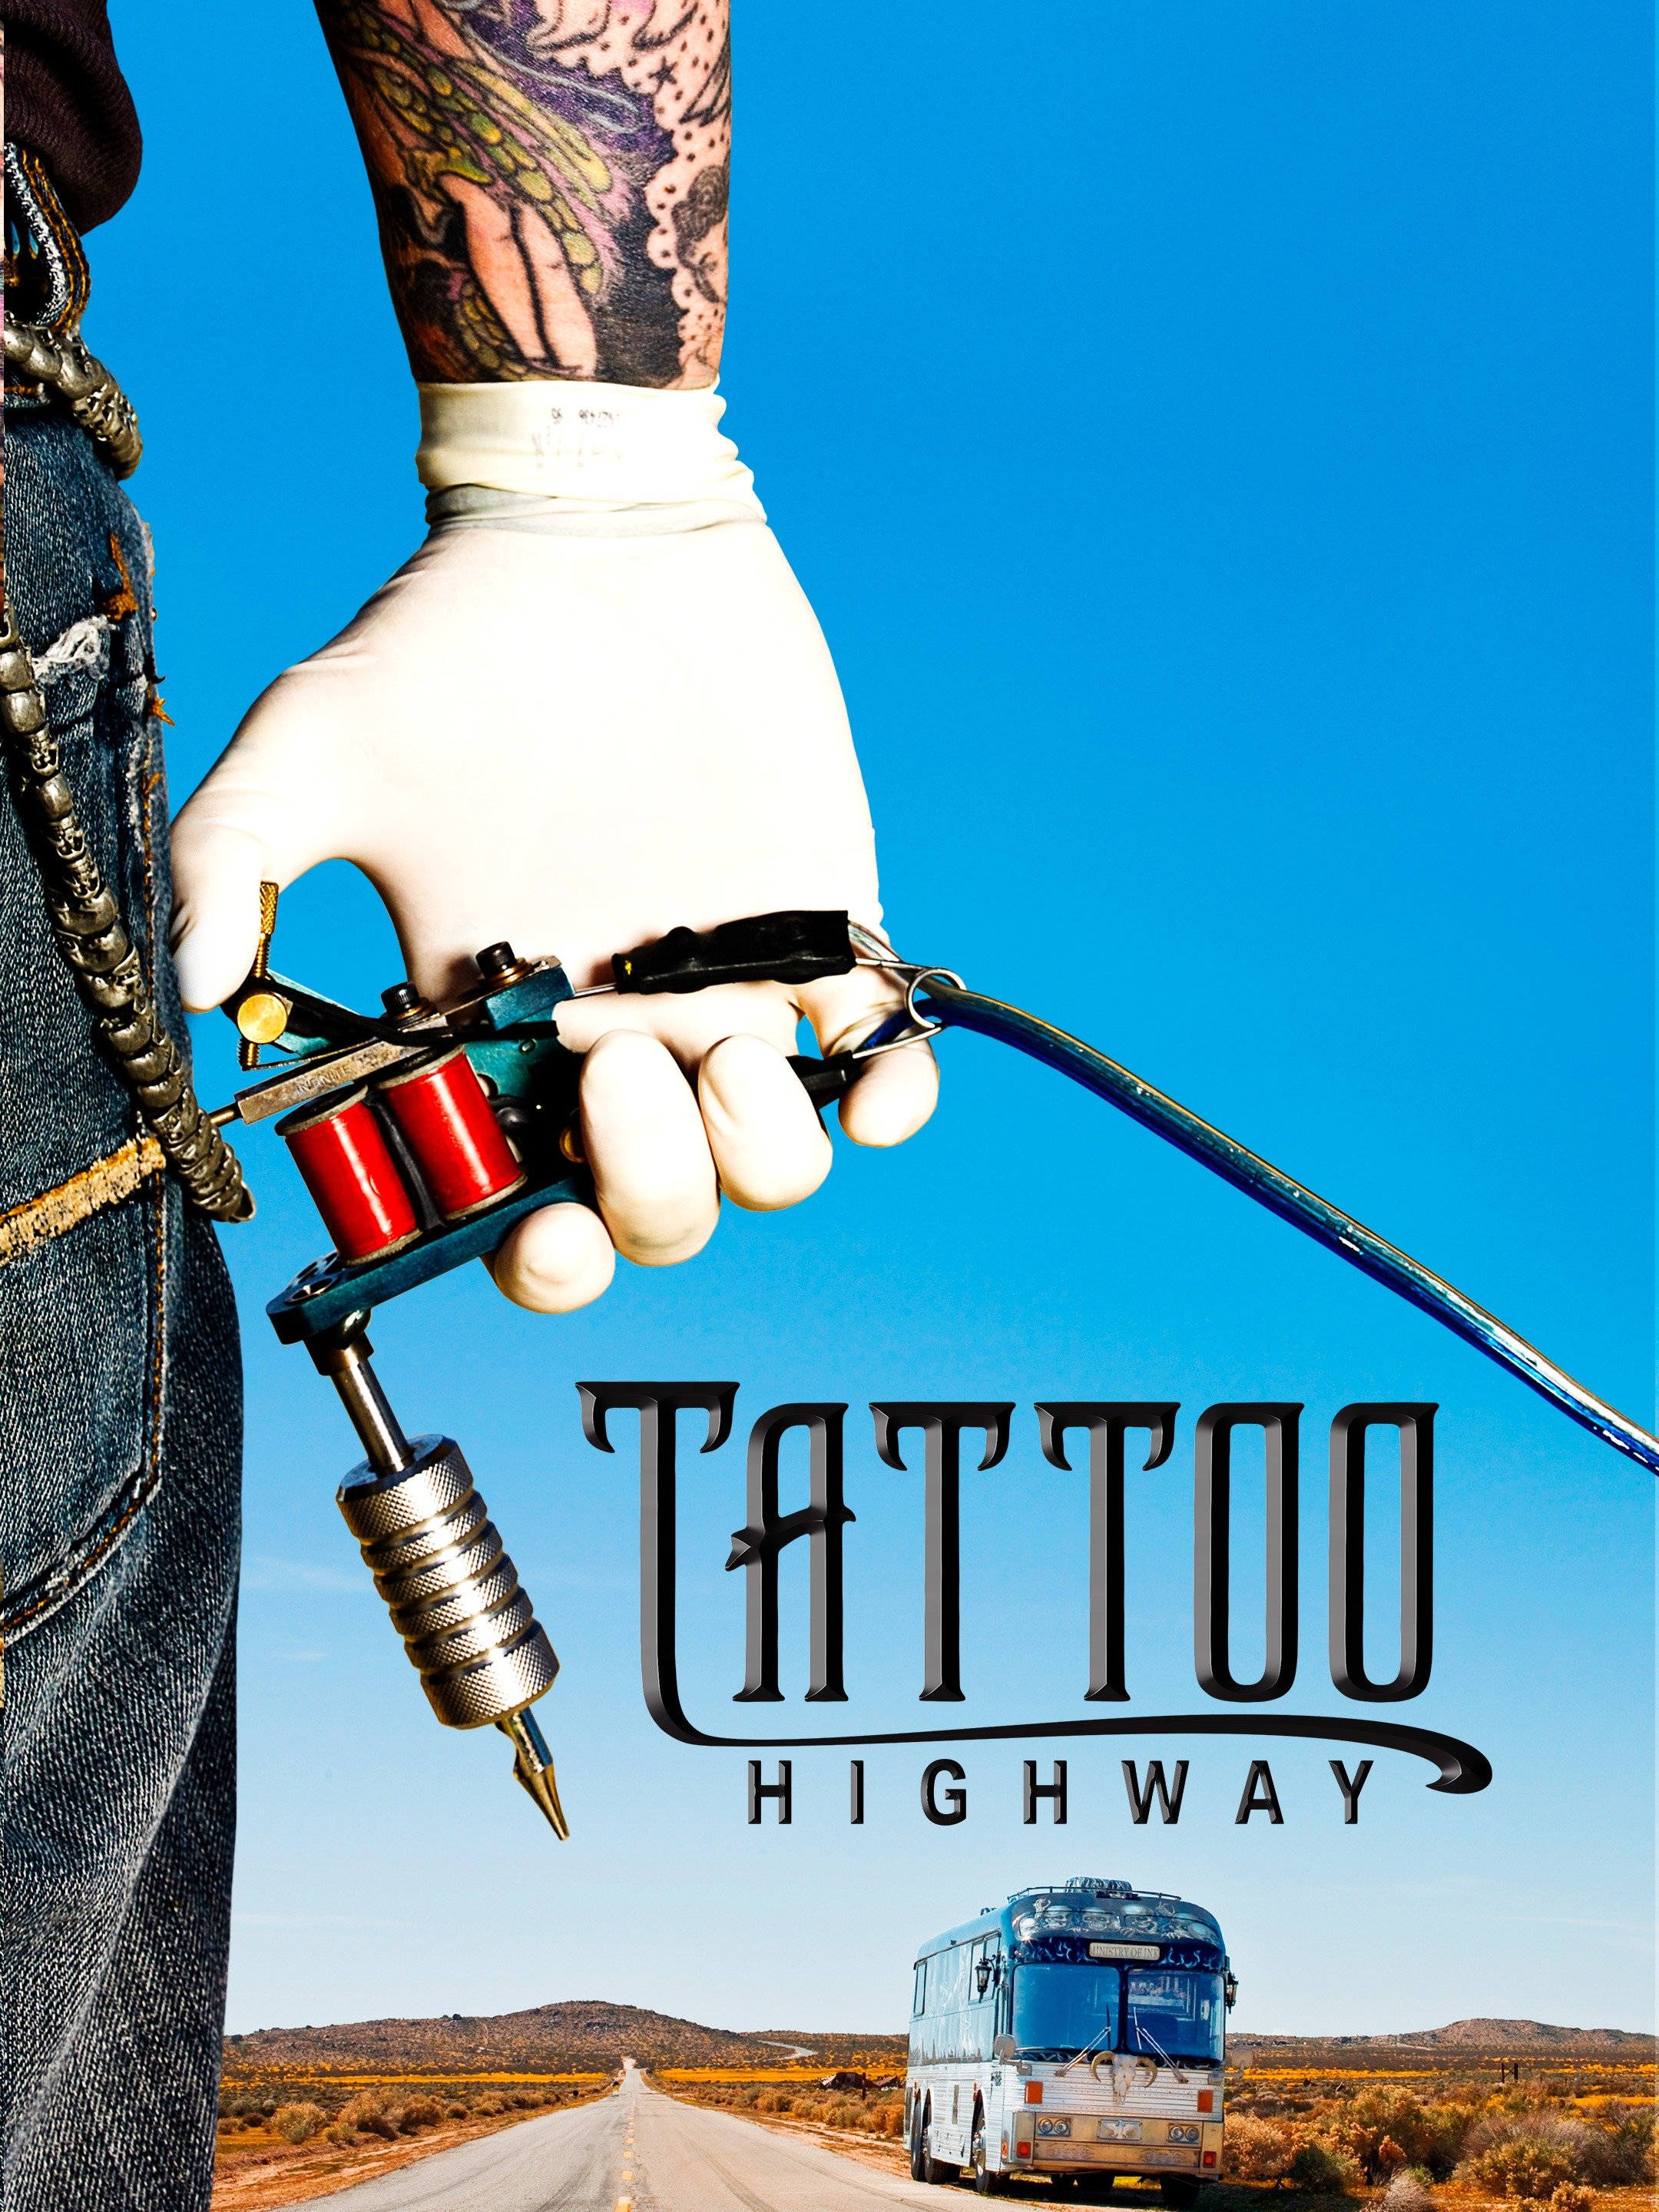 Details more than 65 lost highway tattoo super hot  incdgdbentre